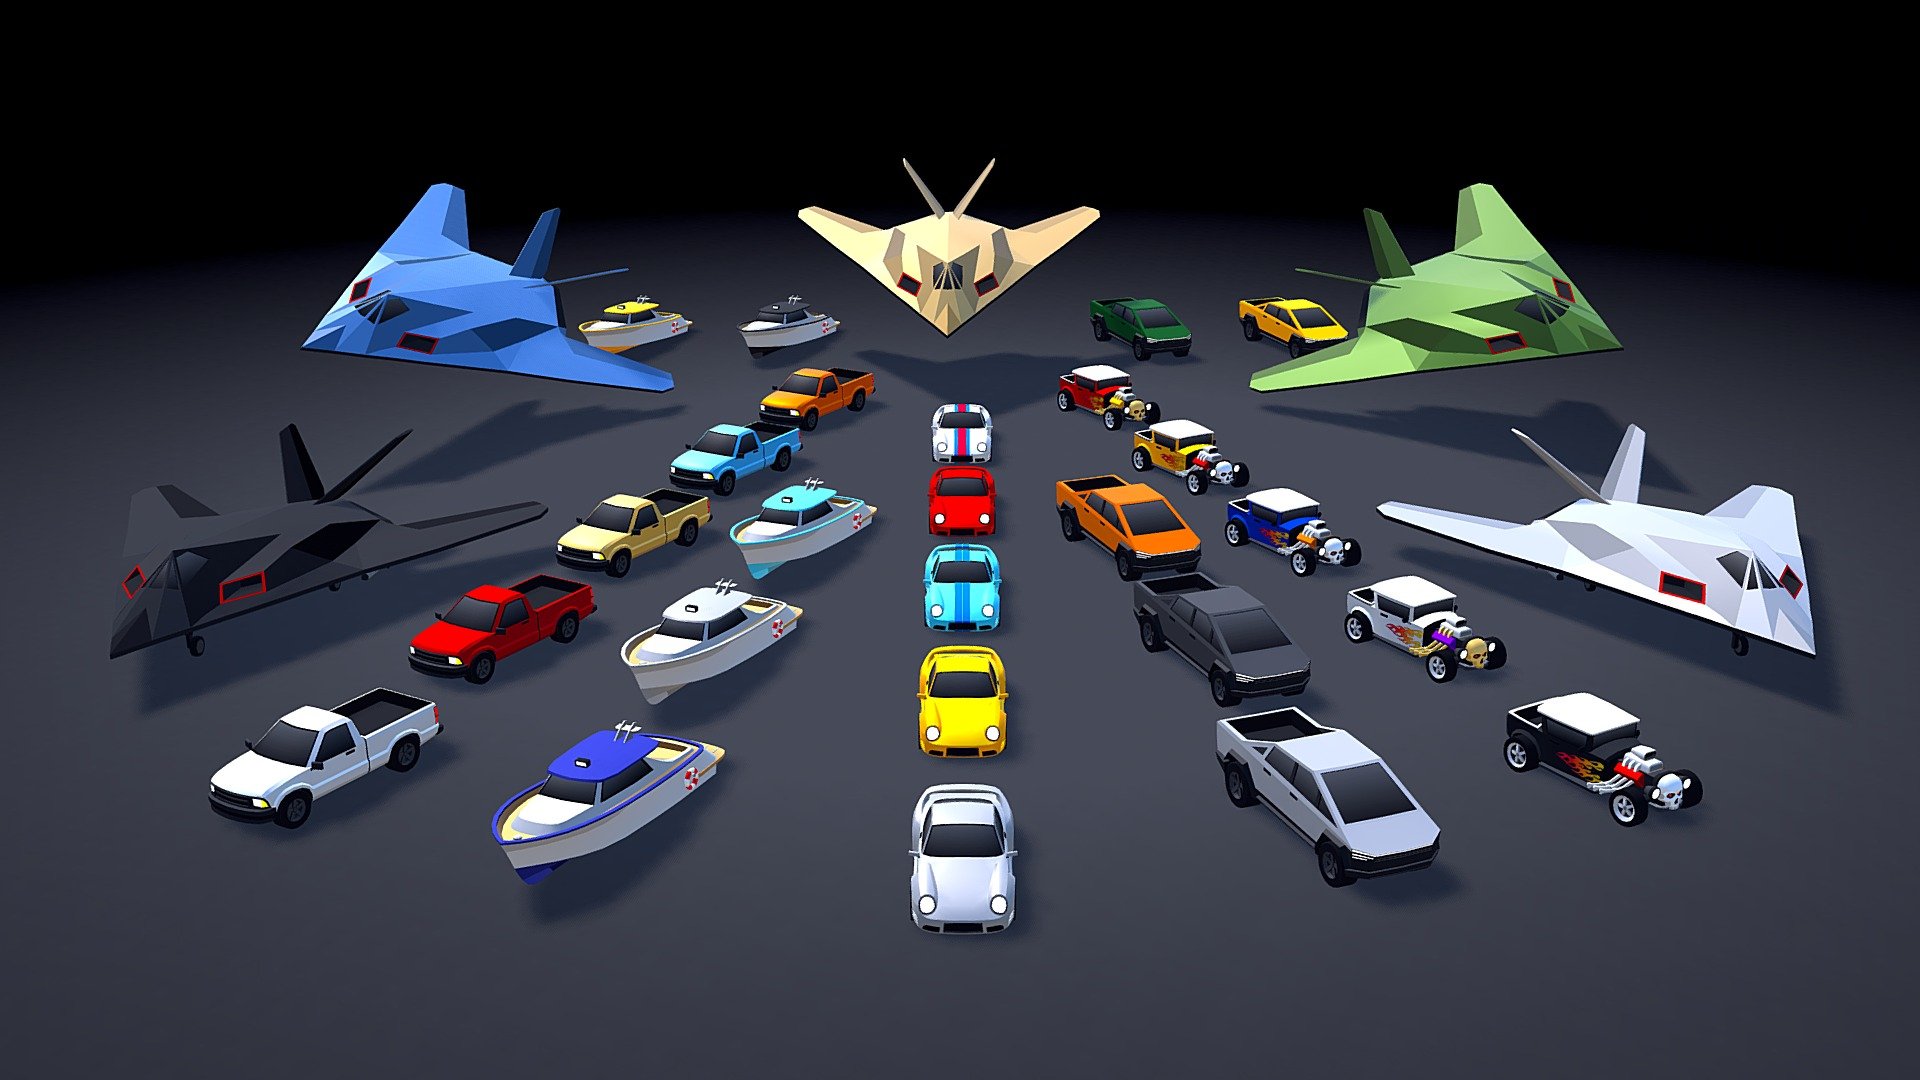 All these vehicles will be added to ARCADE: Ultimate Vehicles Pack in October 7th with no additional cost. Available in Unity3D (in the Unity Asset Store) and Sketchfab (FBX + UNITY Files included).

The update includes war planes, racing cars, trucks and boats!. I hope you like it

Best regards, Mena 3d model